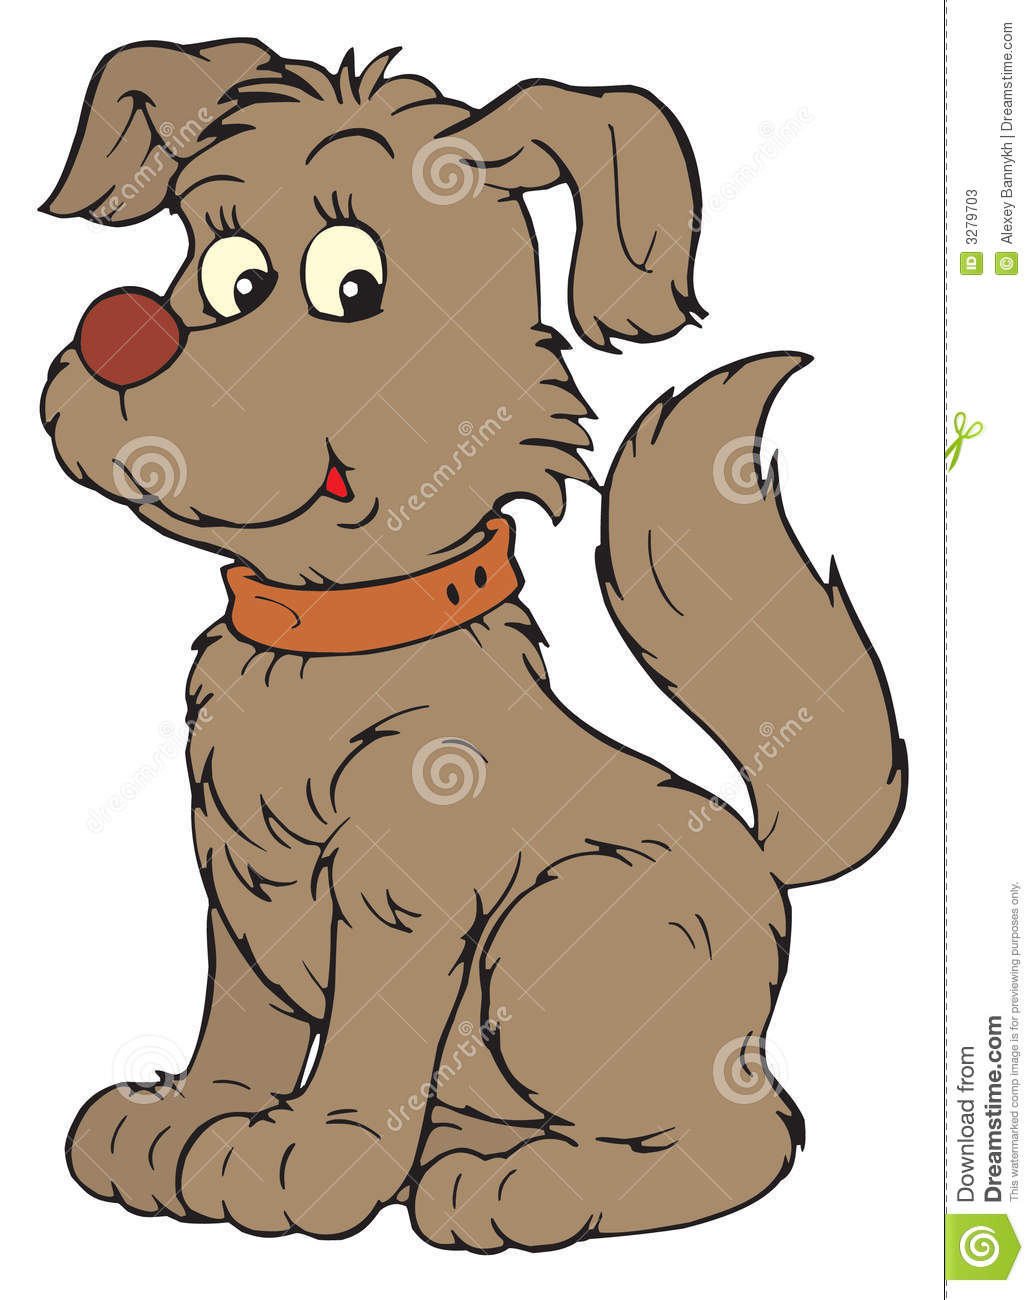 free vector dog clipart - photo #13